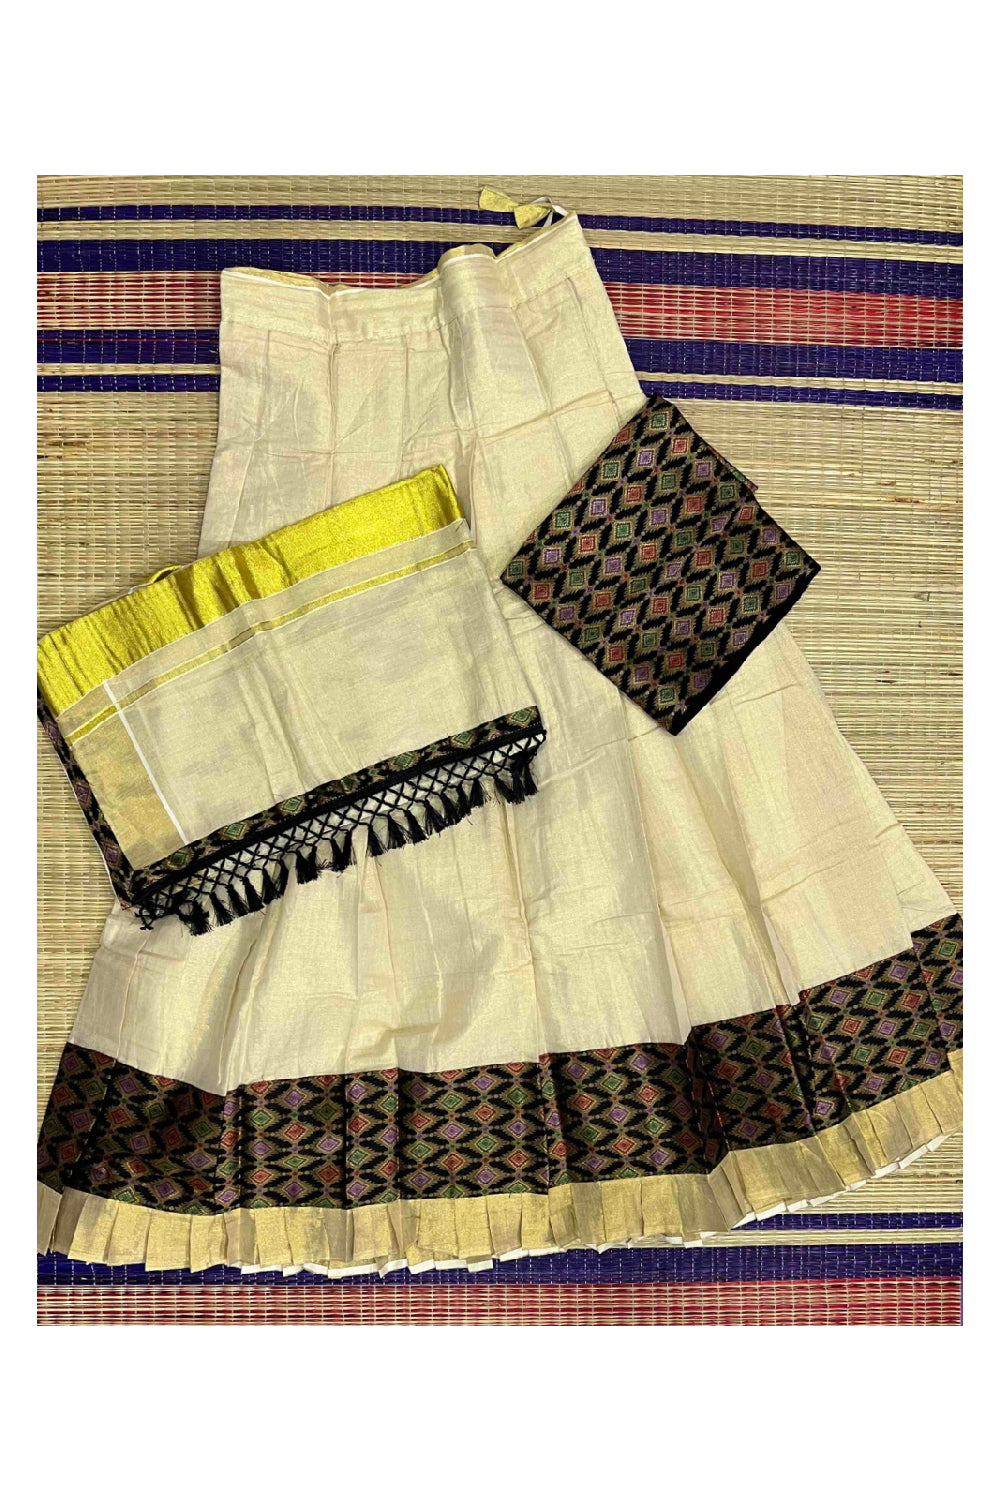 Kerala Tissue Stitched Dhavani Set with Blouse Piece and Neriyathu in with Black Accents